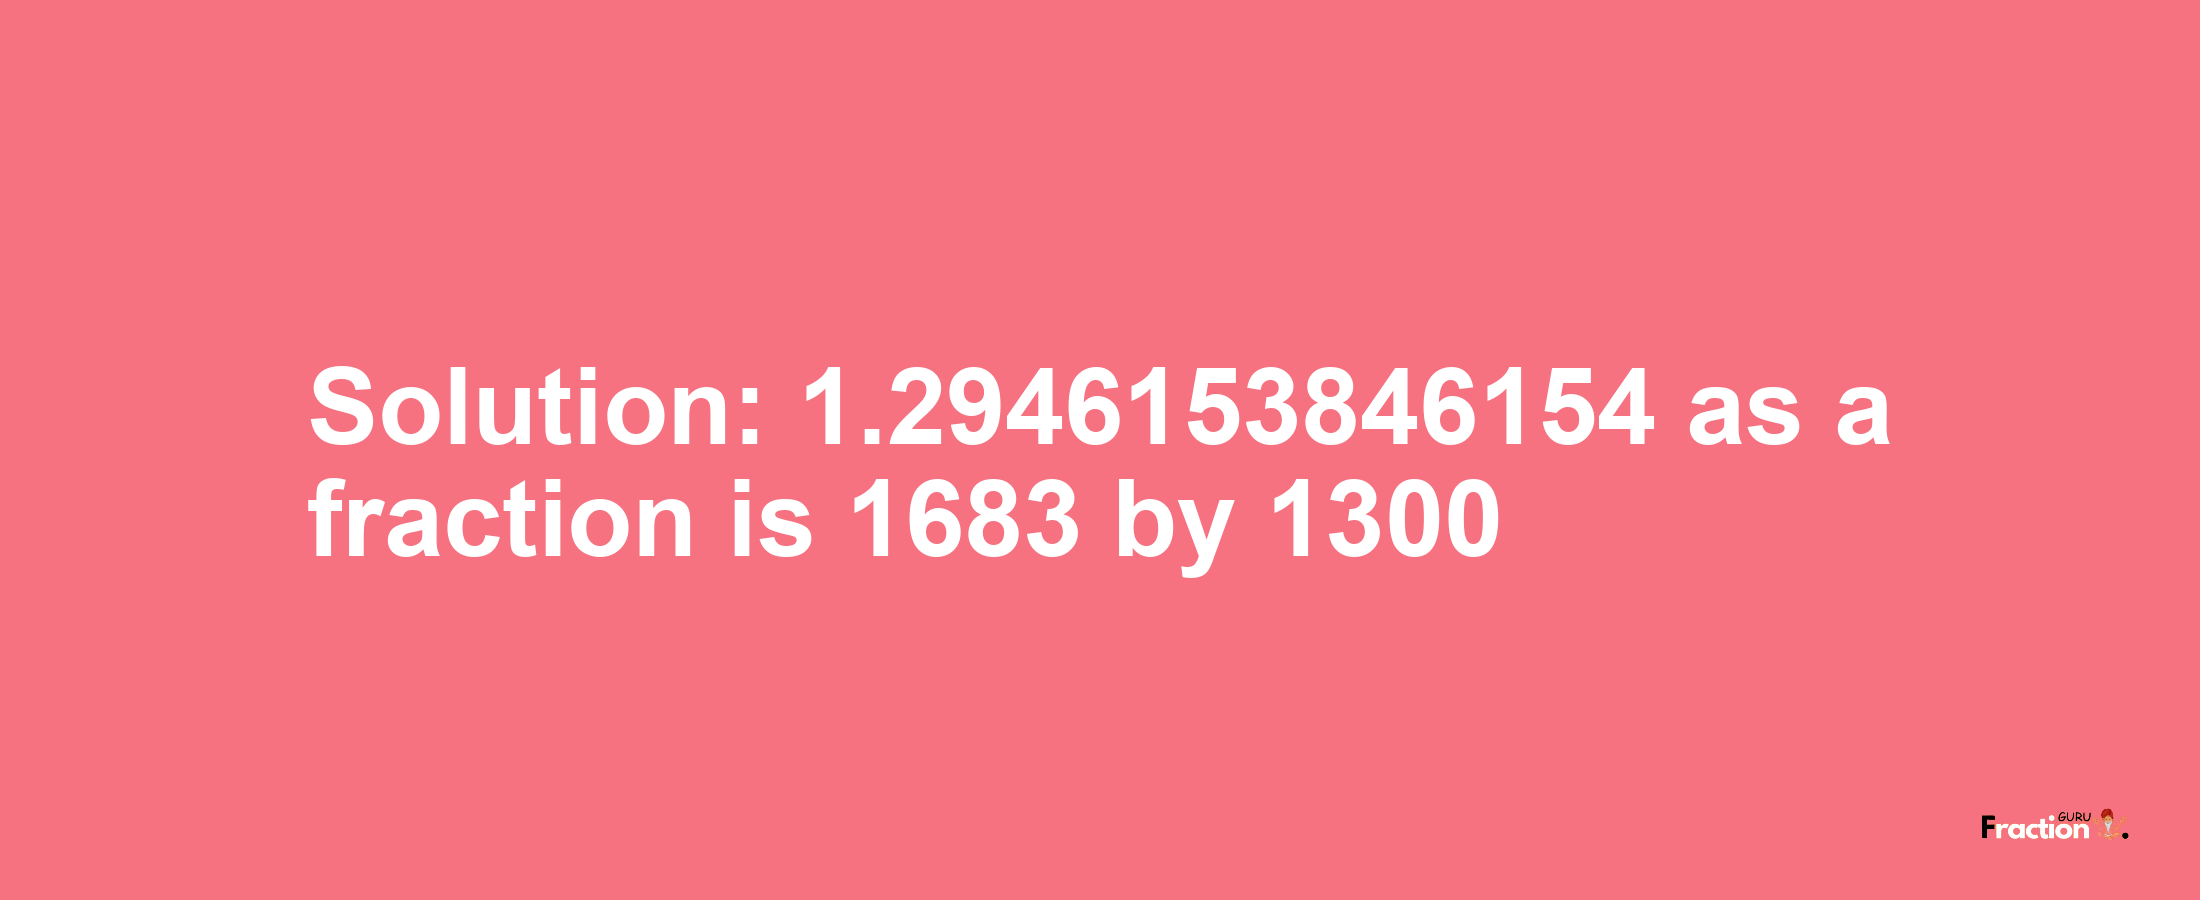 Solution:1.2946153846154 as a fraction is 1683/1300